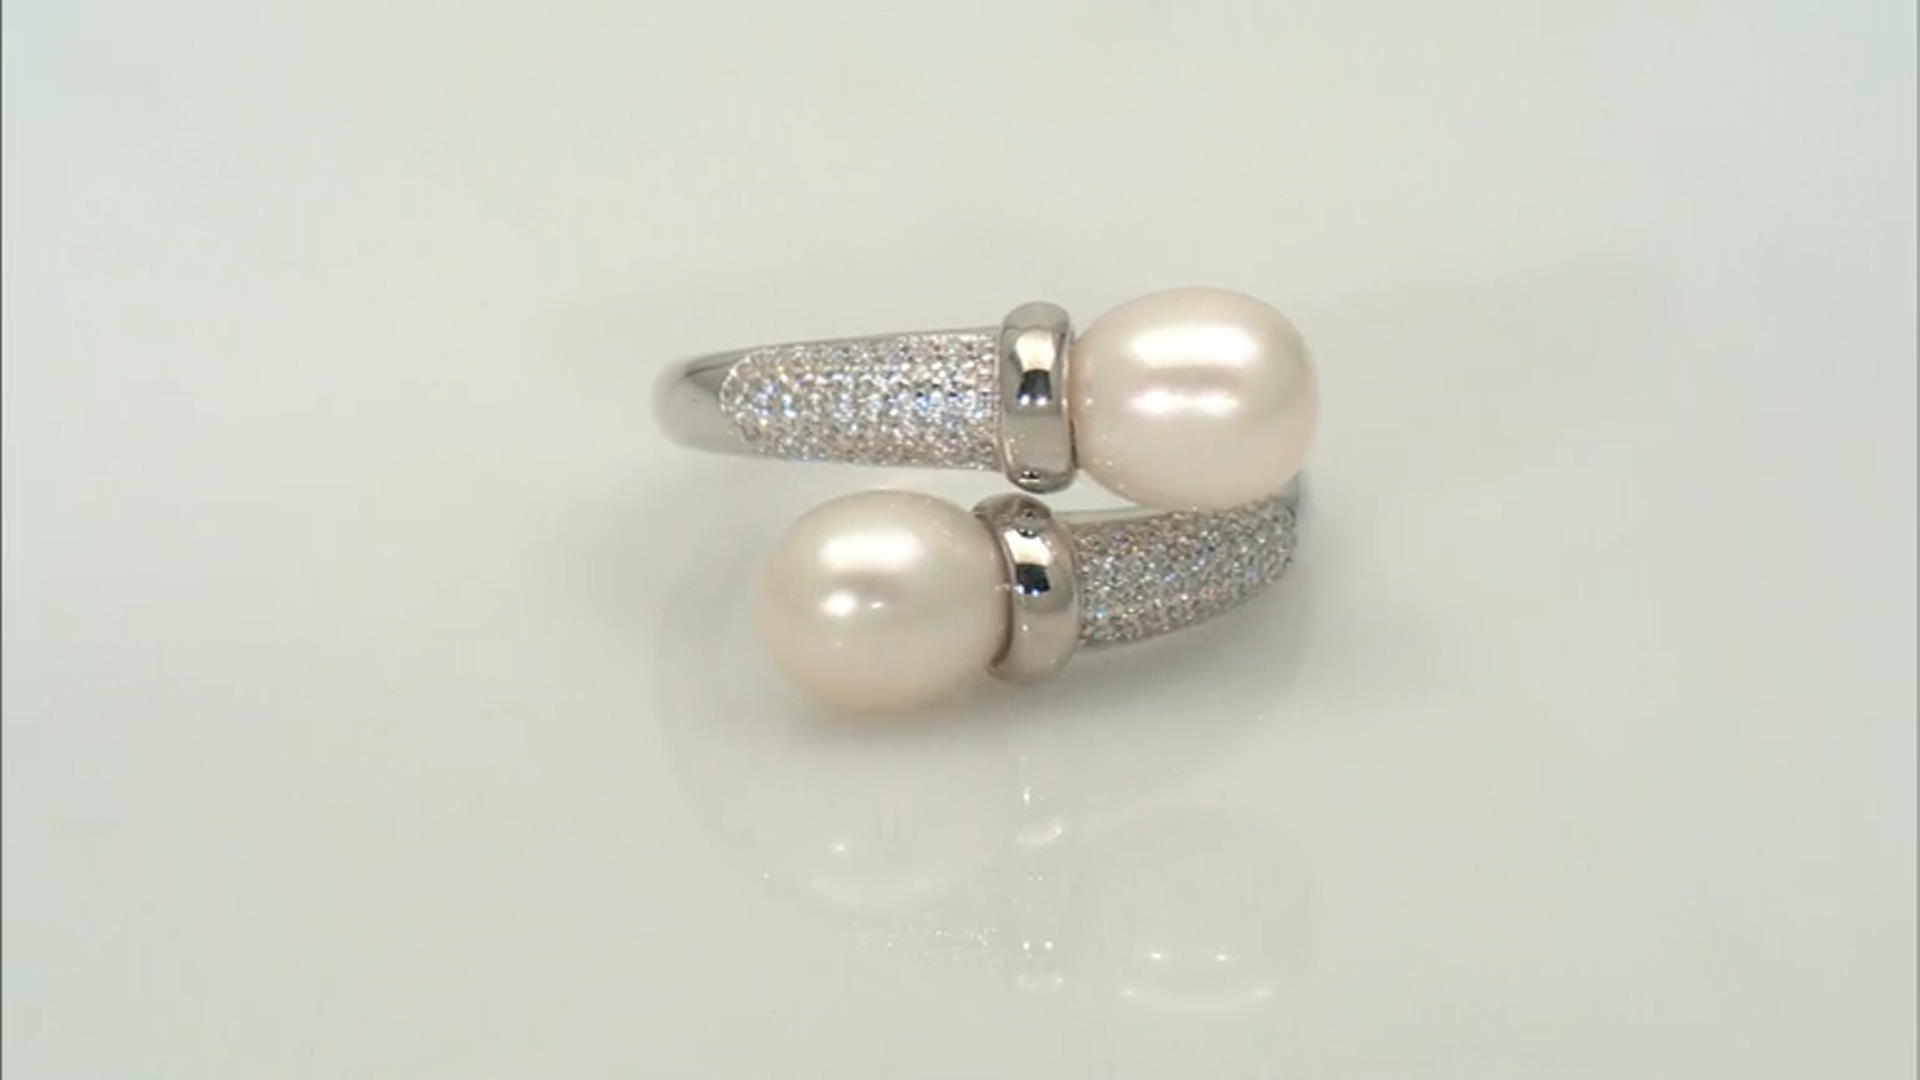 White Cultured Freshwater Pearl and White Cubic Zirconia Rhodium Over Sterling Silver Ring Video Thumbnail